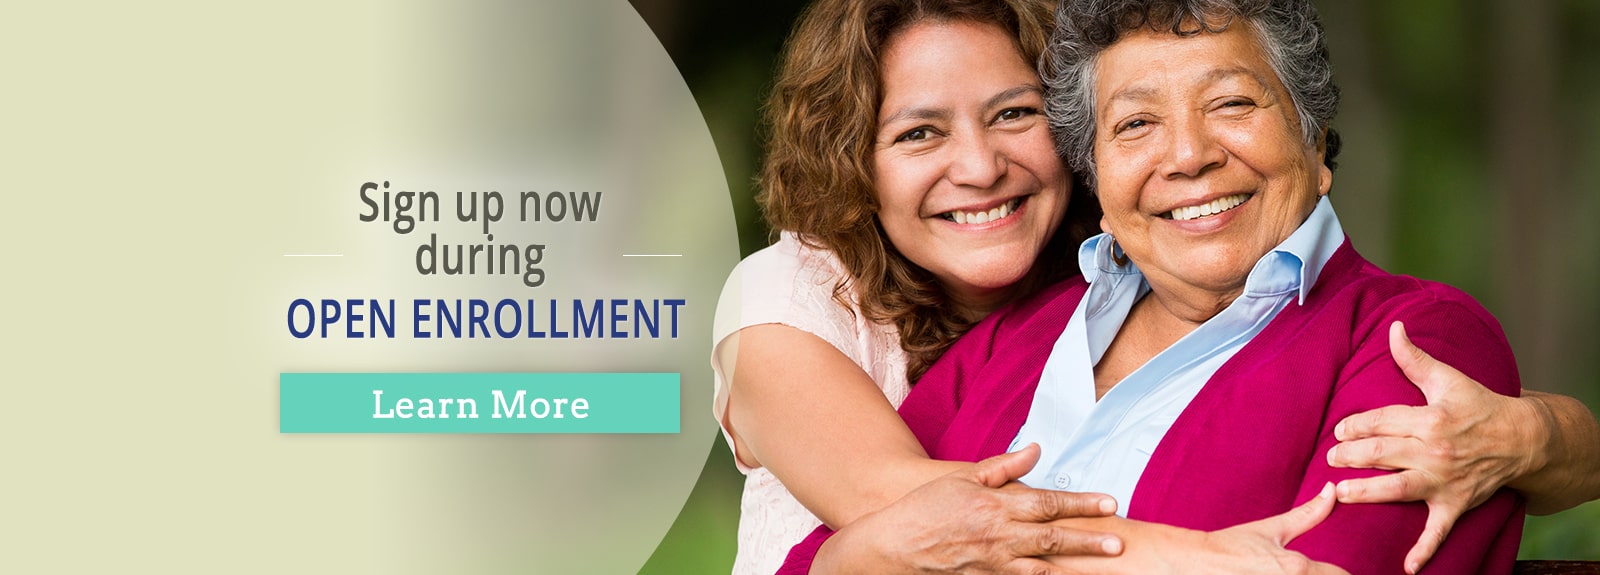 Sign up now during OPEN ENROLLMENT. Learn More.